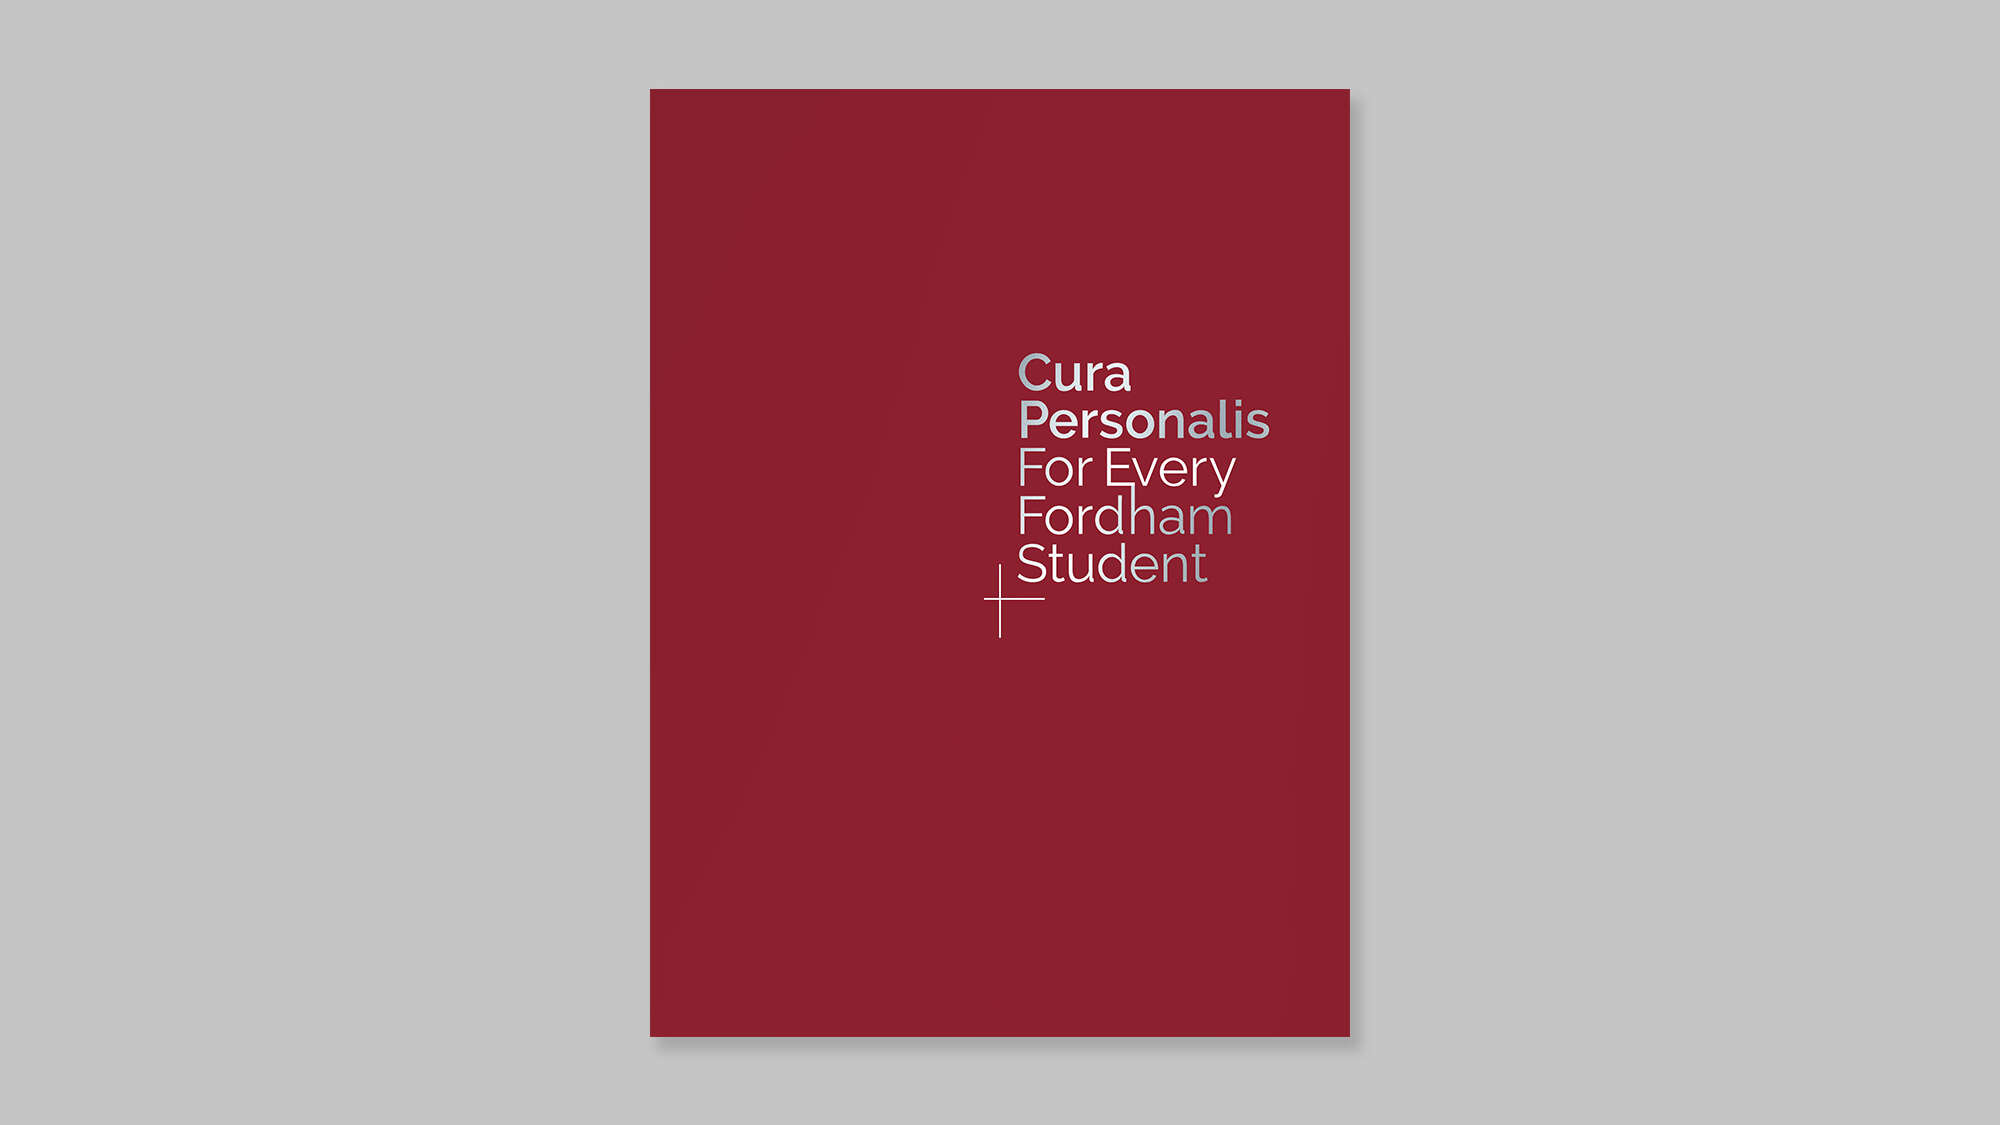 Campaign folder cover: Cura Personalis For Every Fordham Student